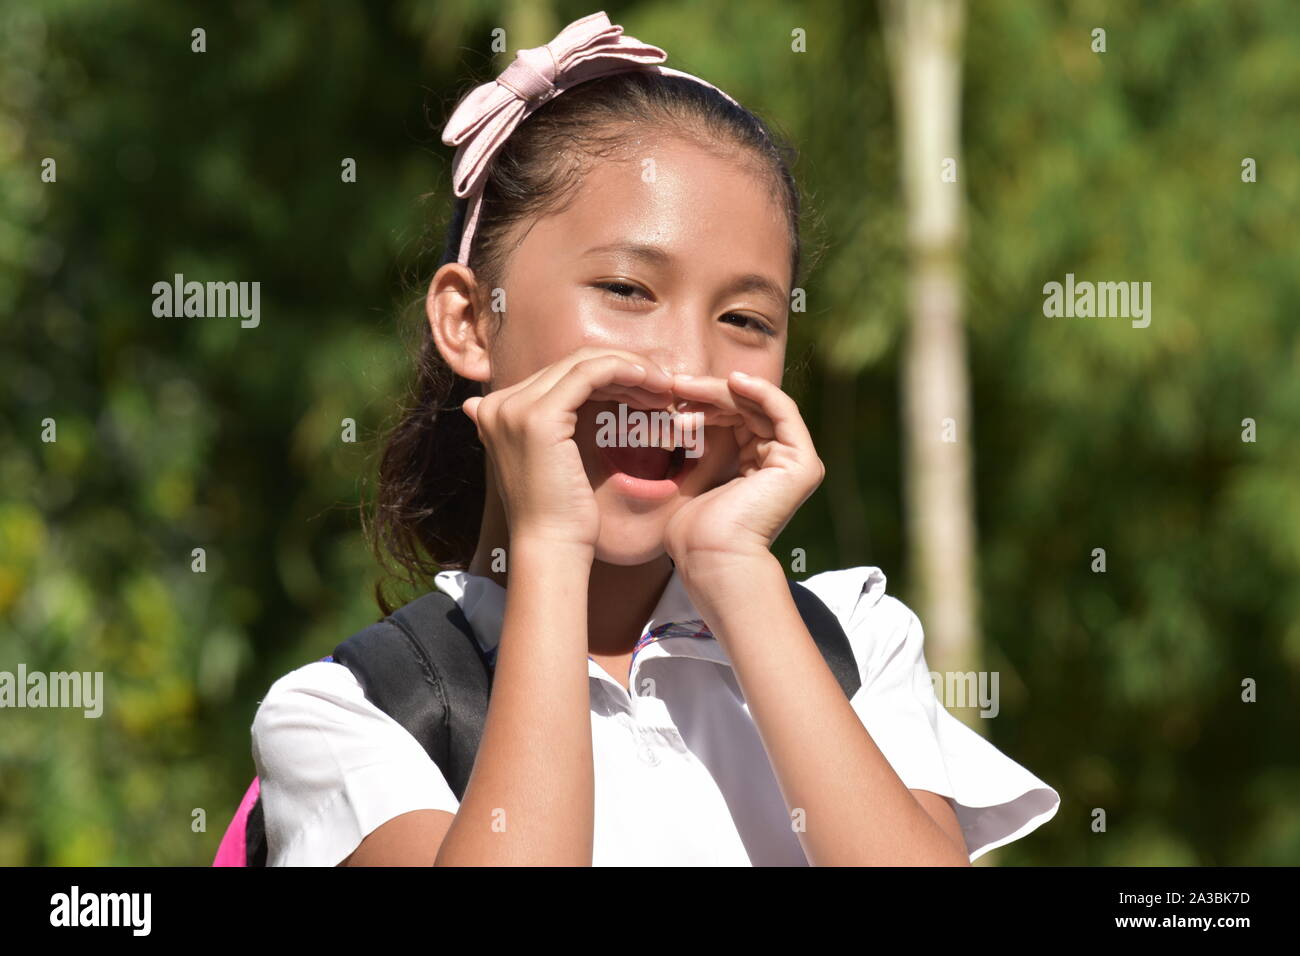 A Girl Student Yelling With Notebooks Stock Photo